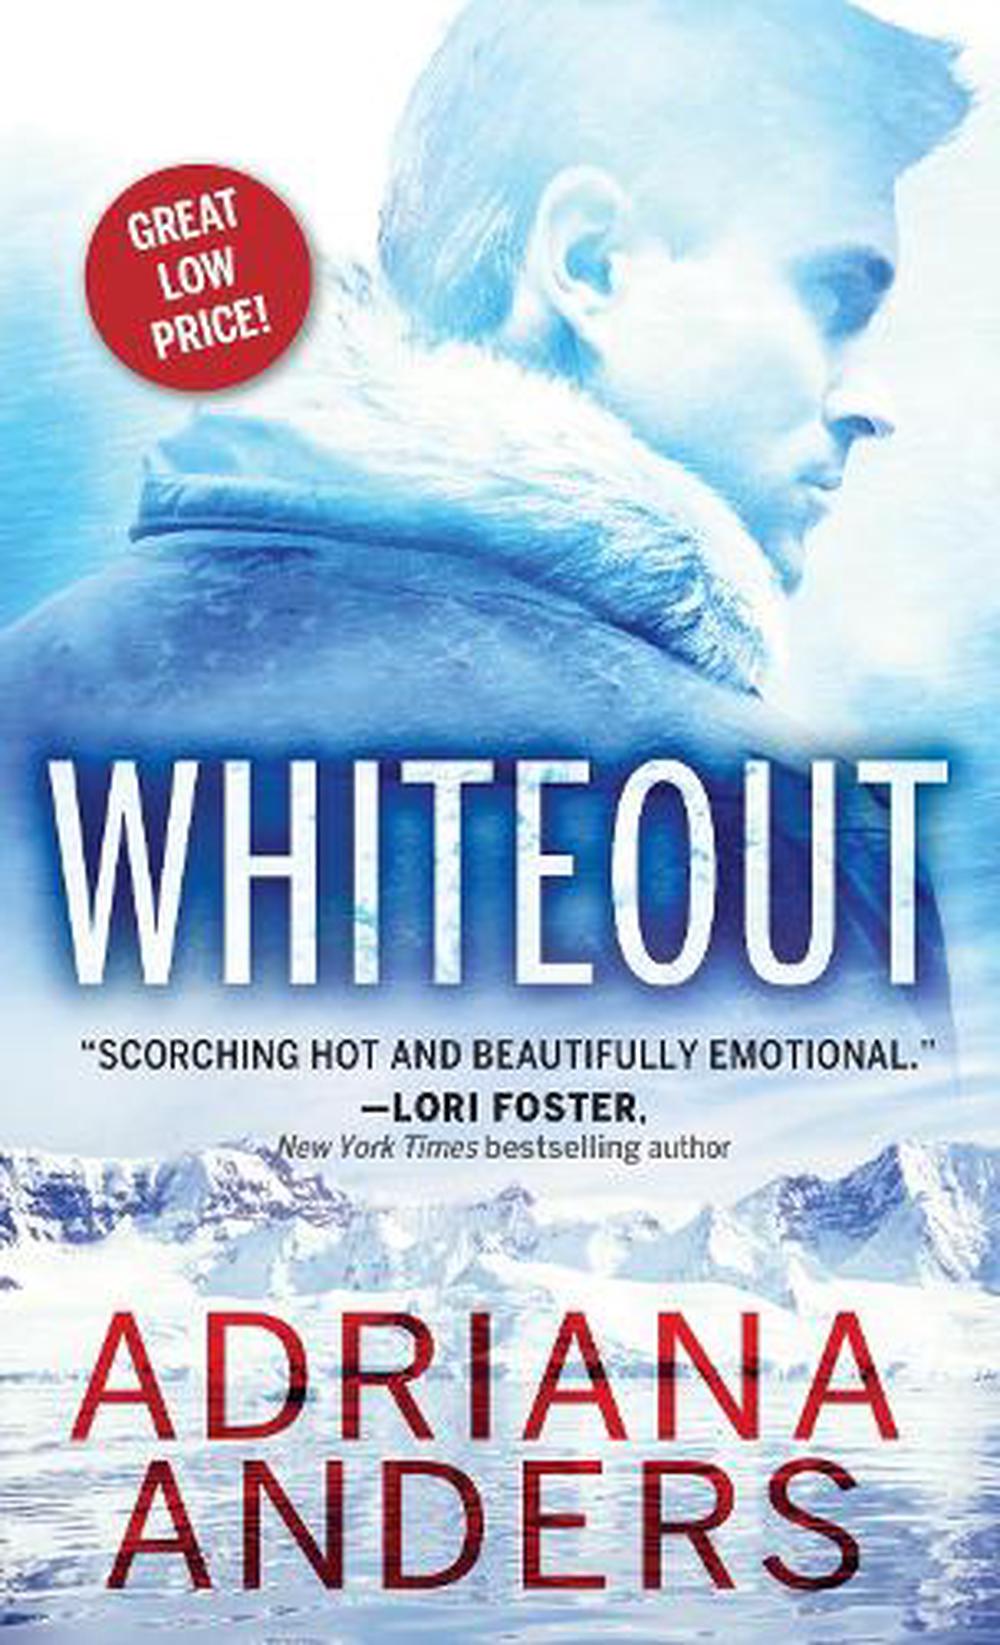 whiteout book adriana anders